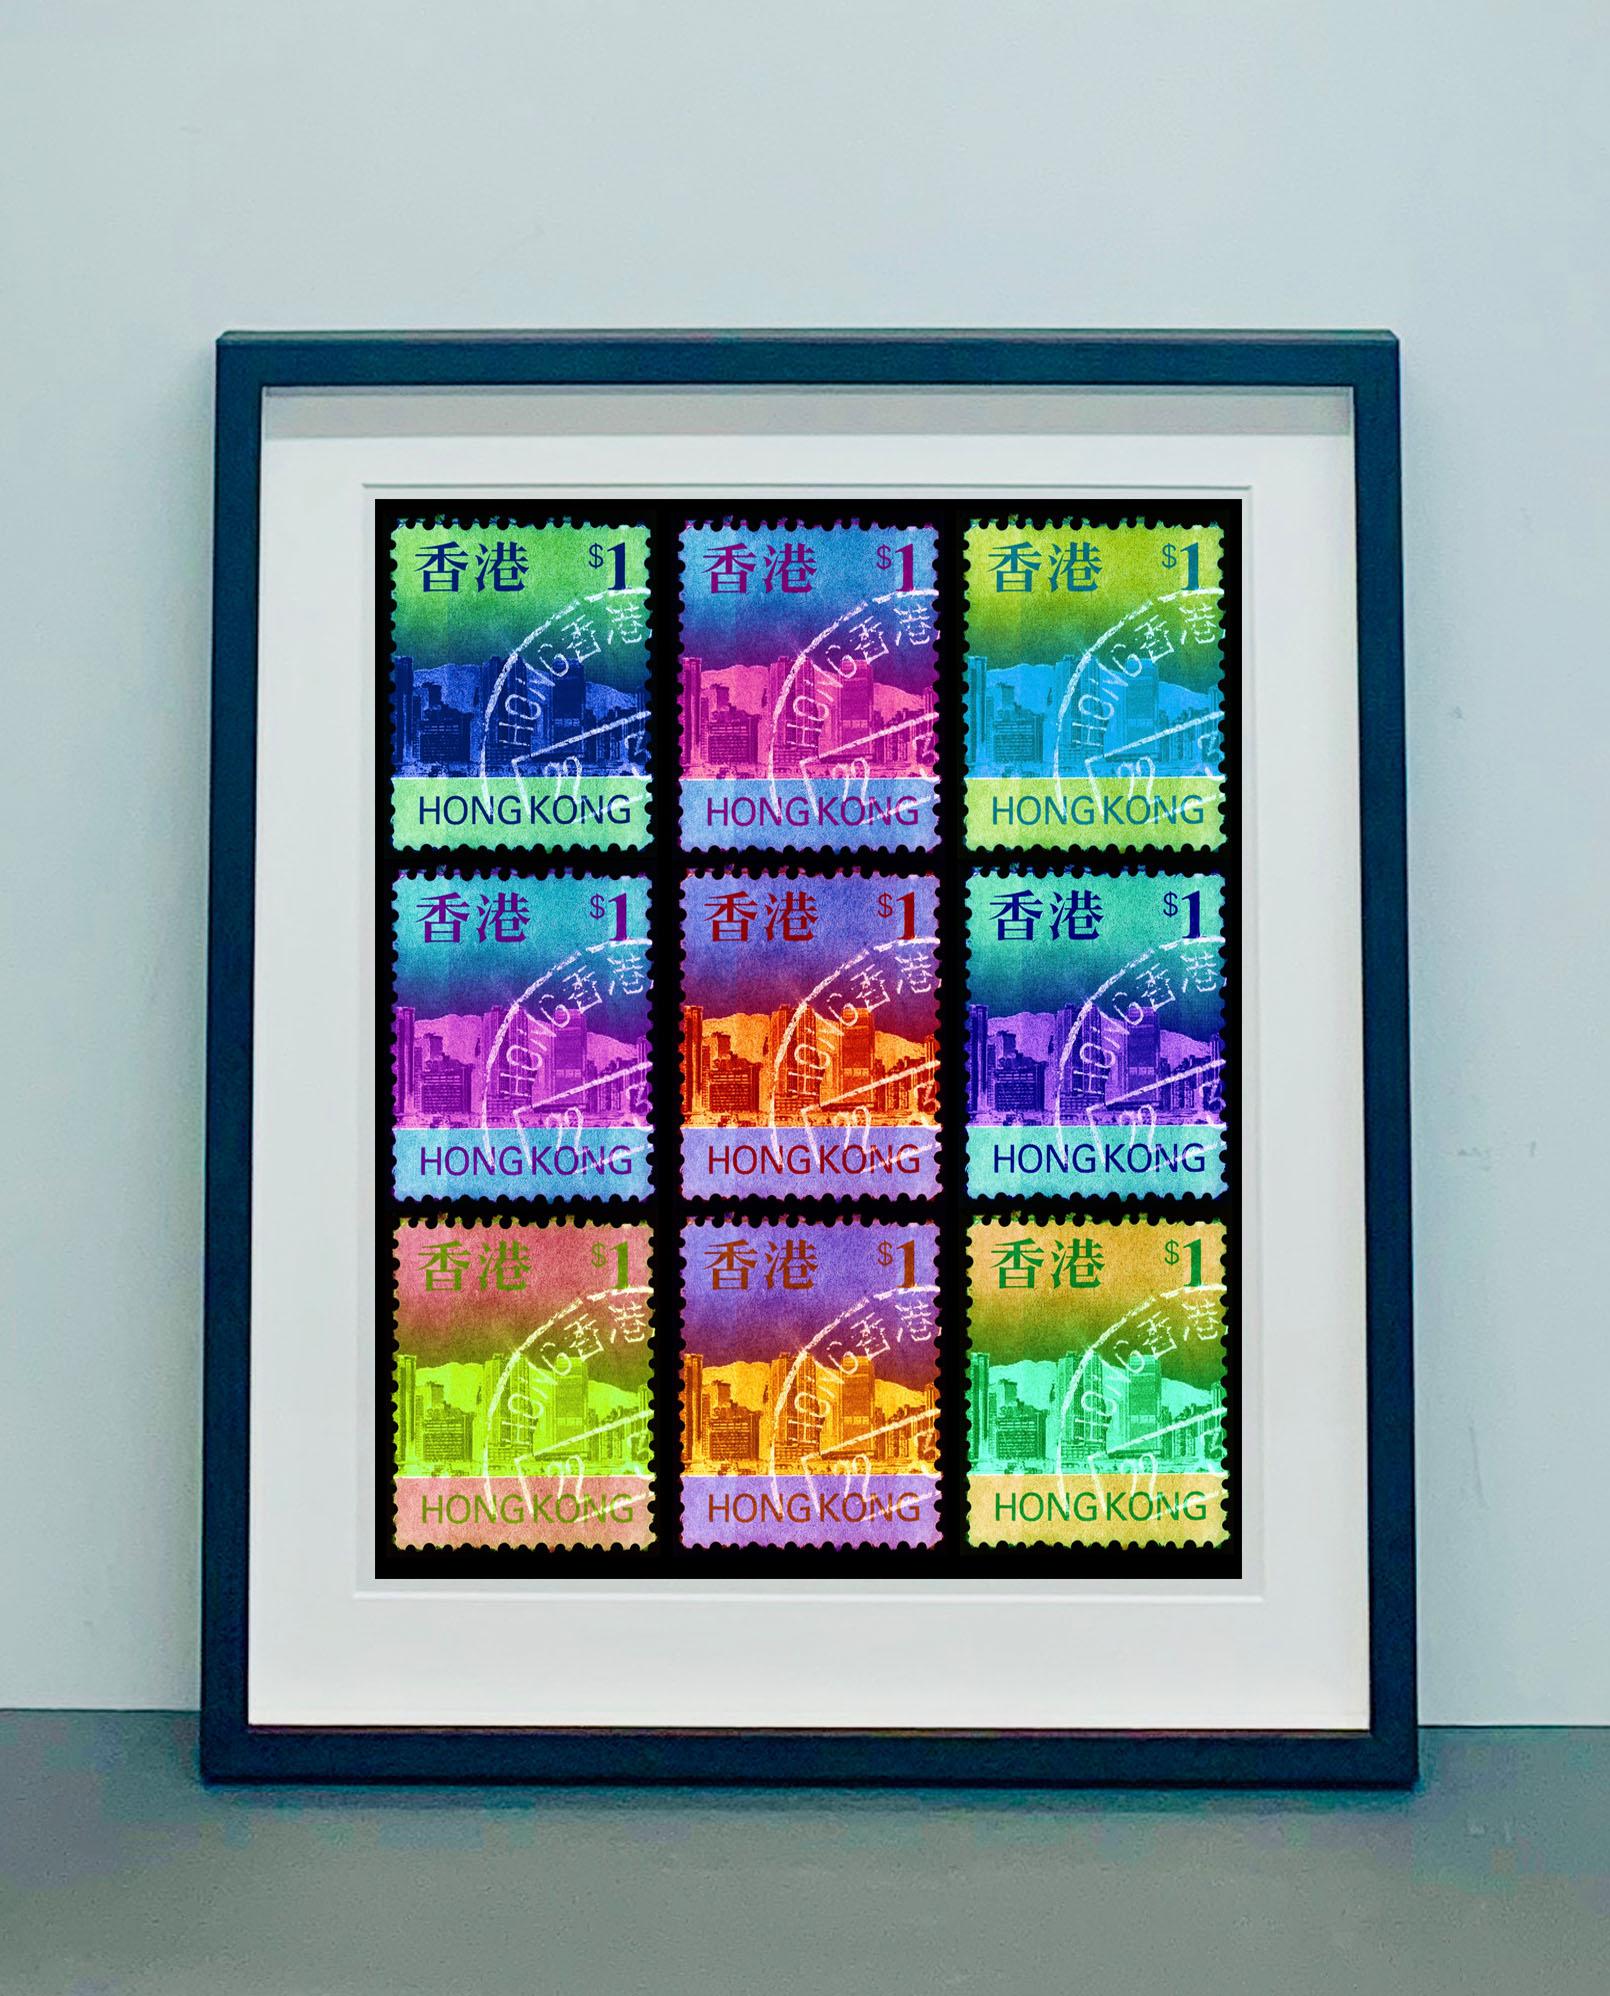 Stamp Collection - Eat, Sleep, HK$1, Repeat - Conceptual, Pop Art, Photography  - Print by Heidler & Heeps